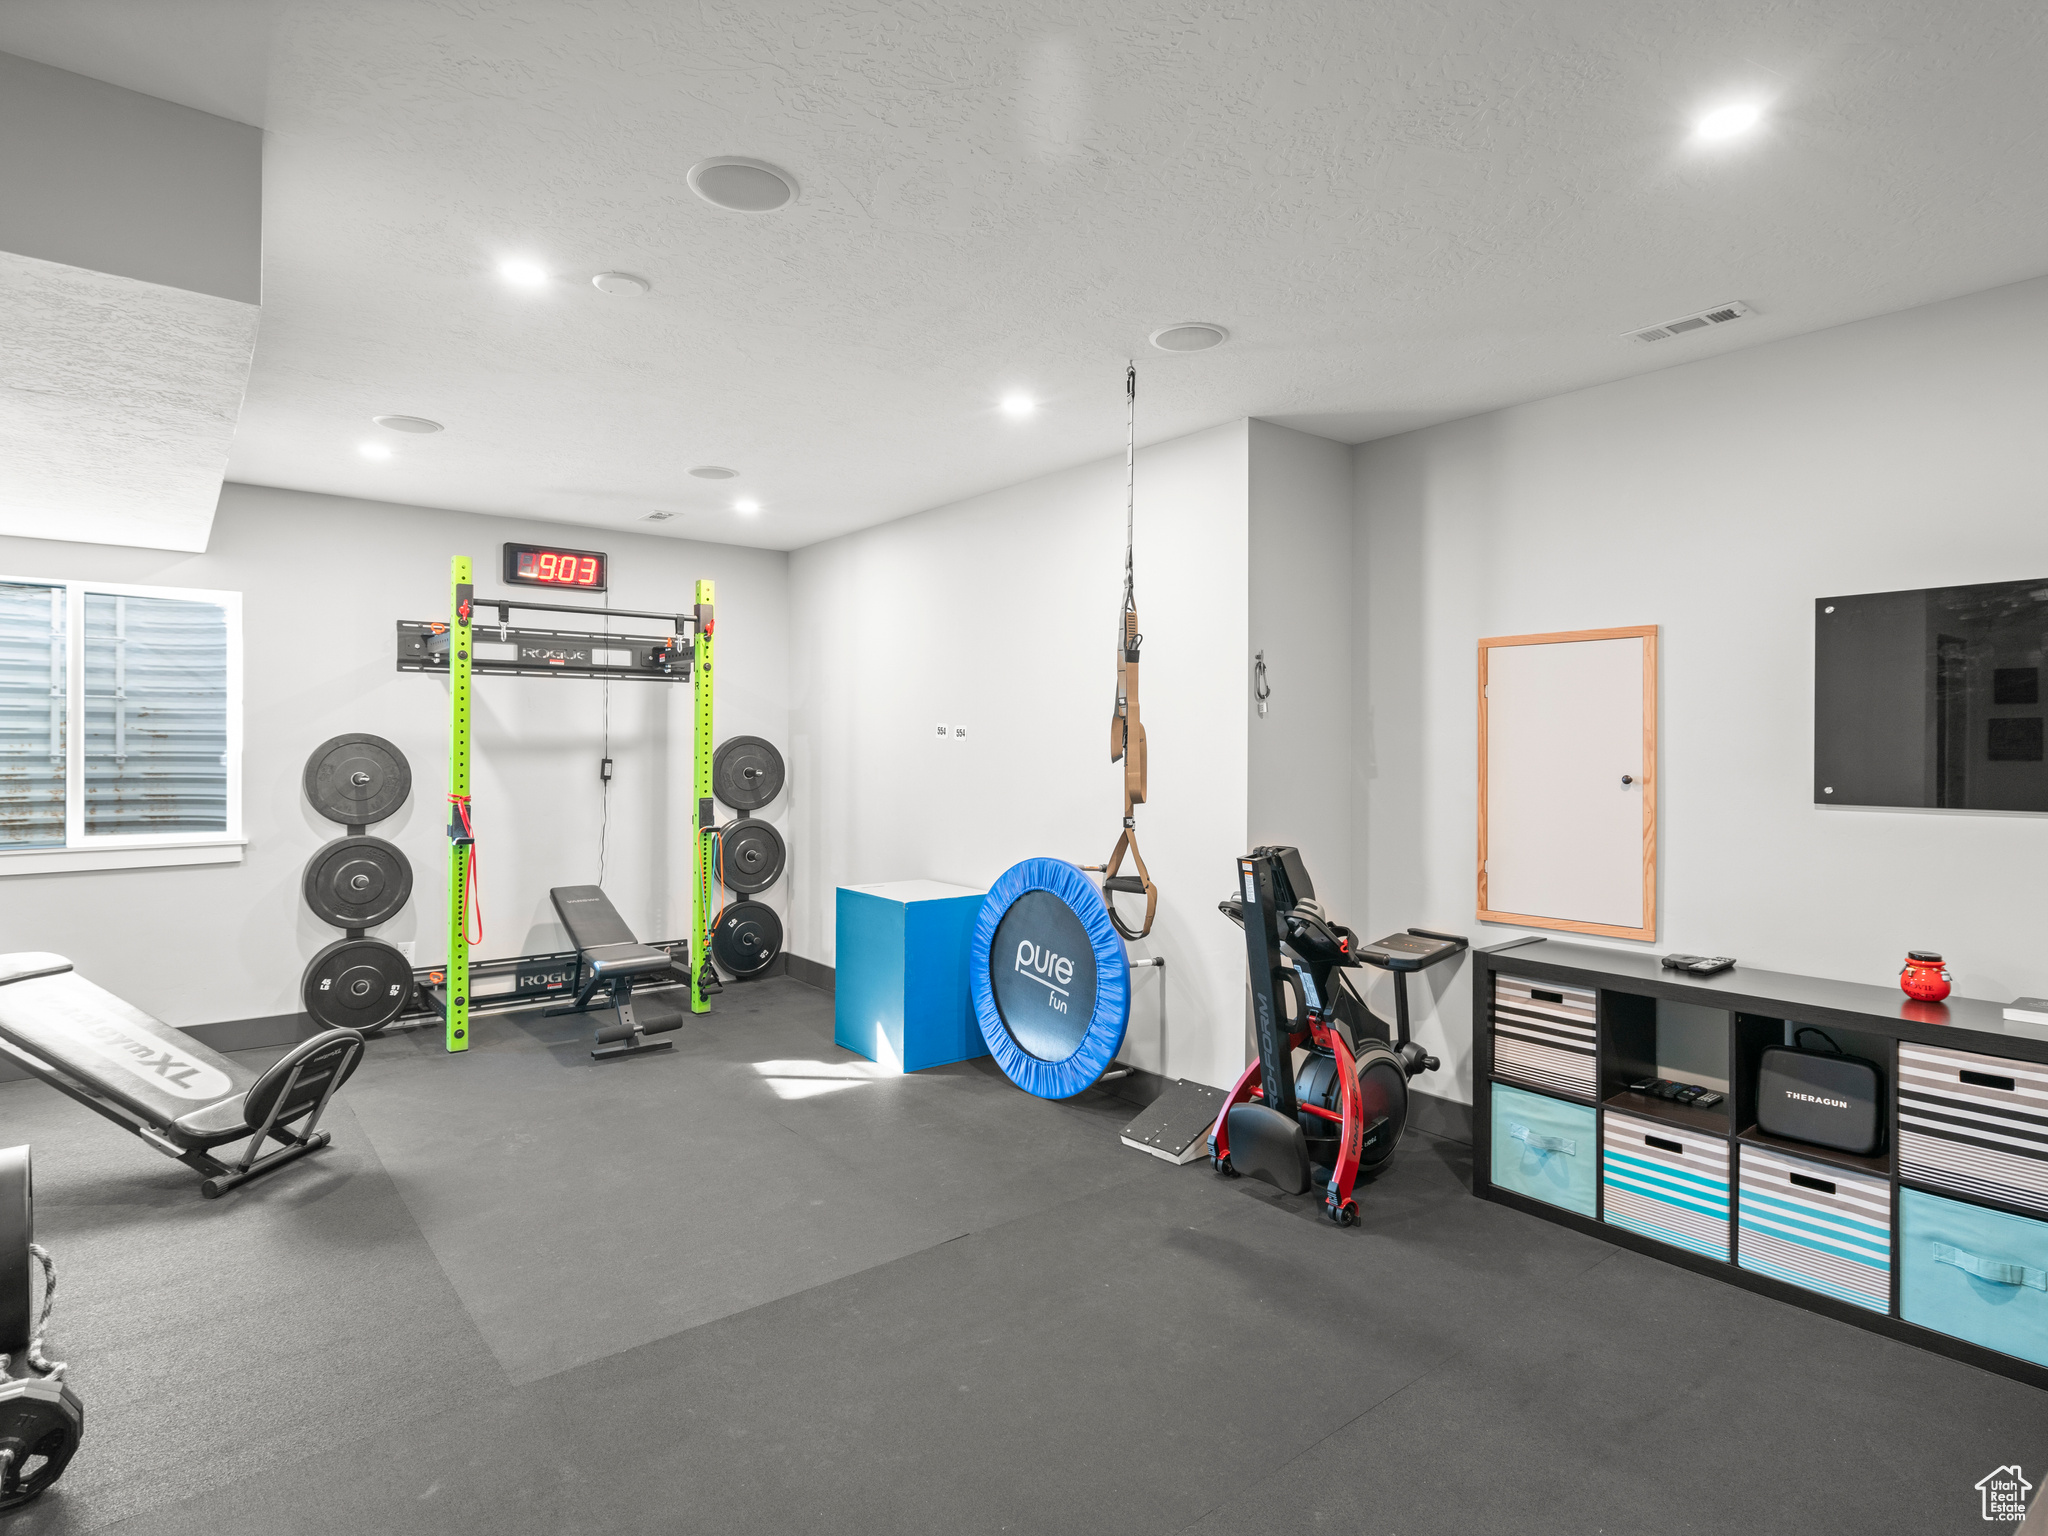 Exercise room with concrete flooring and a textured ceiling